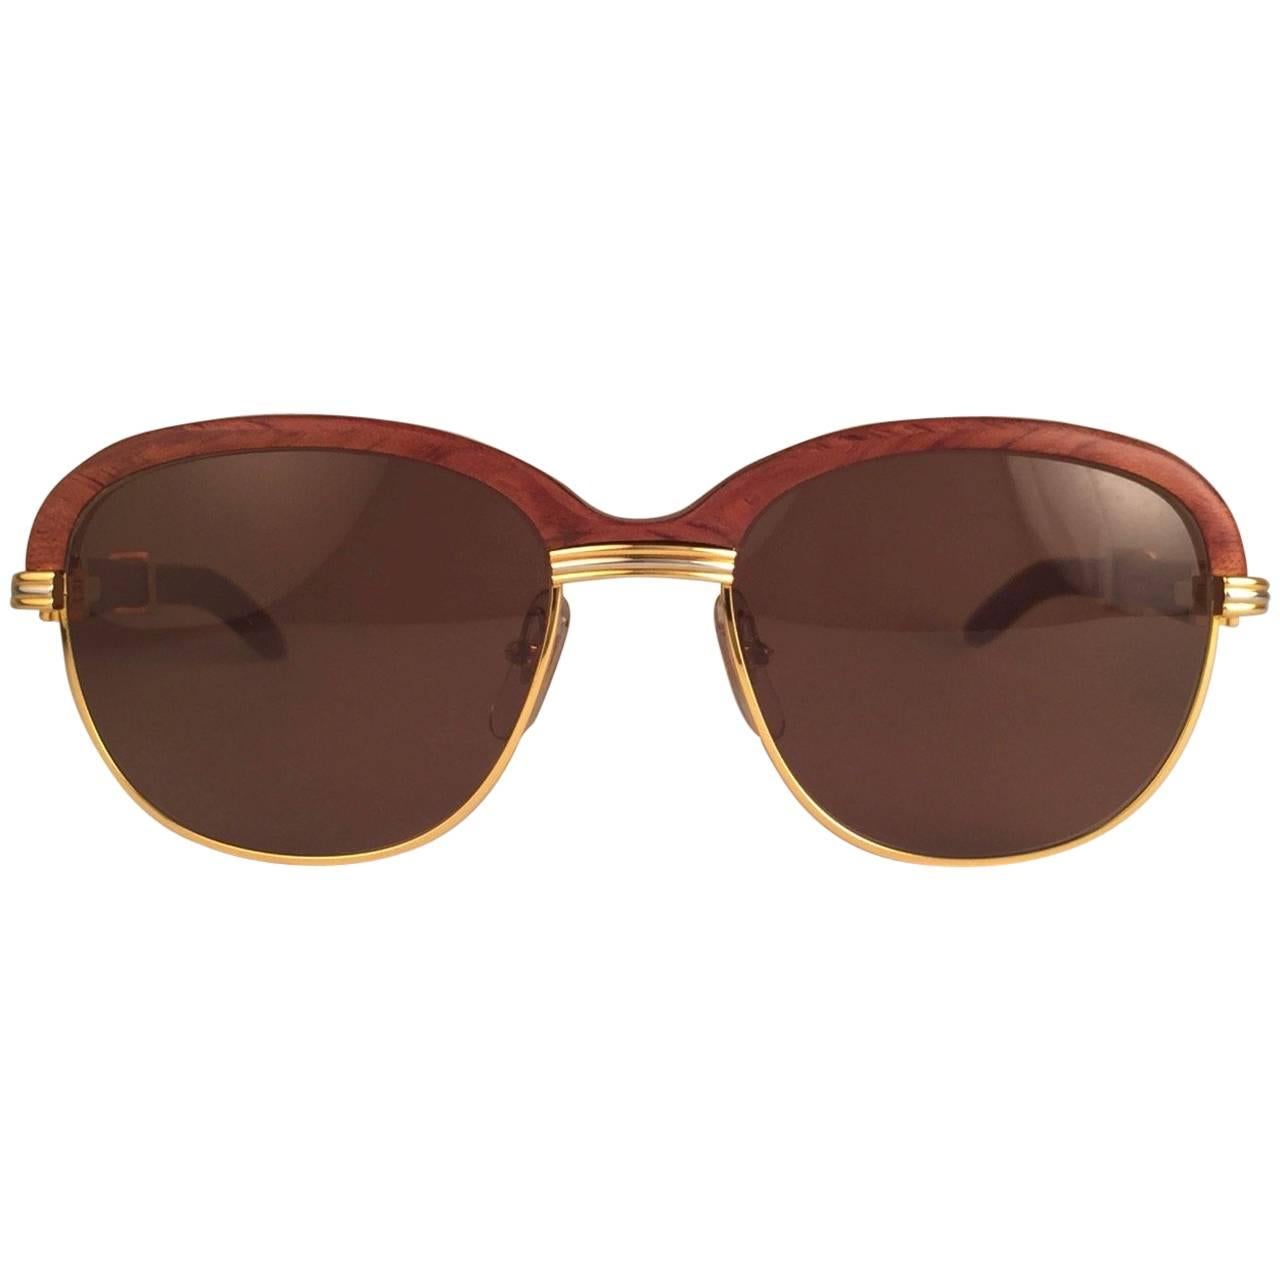 Original New 1990 Cartier Malmaison Palisander hardwood sunglasses with honey brown(uv protection) lenses. 
Front and sides in yellow and white gold and has the famous wooden front. Temples are also Palisander combined with gold. 
Amazing